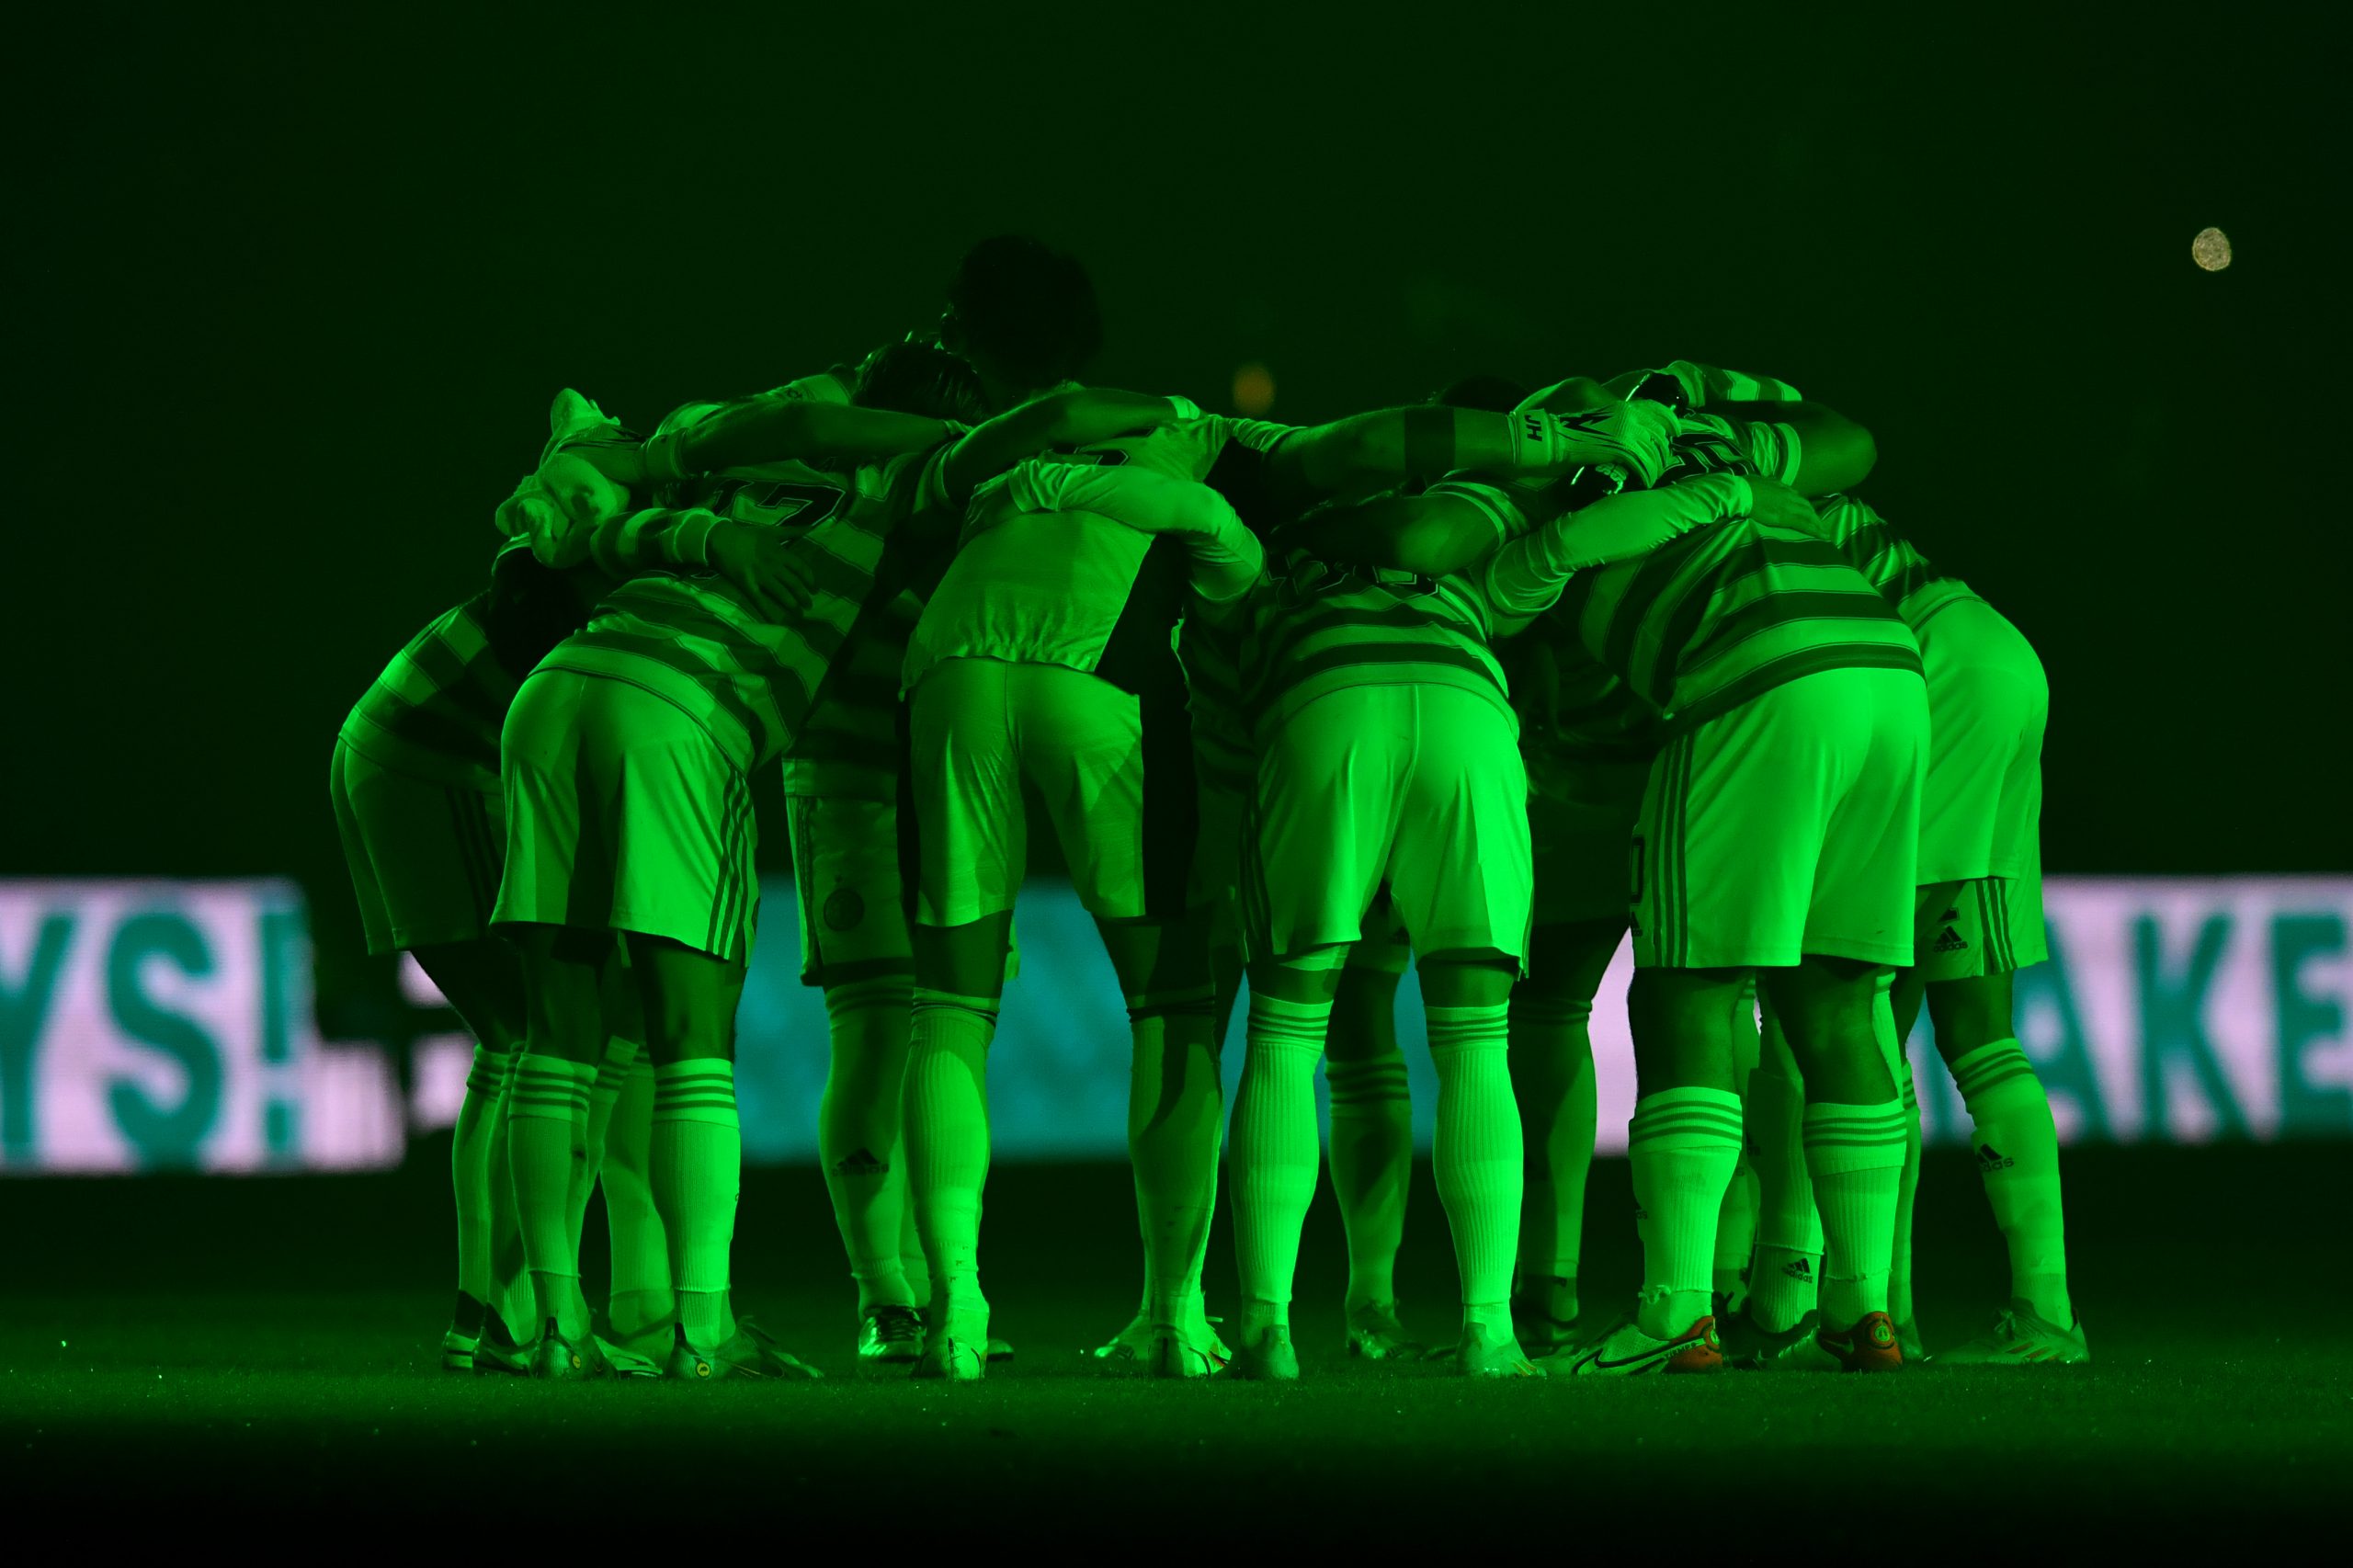 GLASGOW, SCOTLAND - FEBRUARY 02:  Celtic players form a huddle before the Cinch Scottish Premiership match between Celtic FC and Rangers FC at  on February 02, 2022 in Glasgow, Scotland. (Photo by Mark Runnacles/Getty Images). The 4th Official uses images provided by the following image agency: Getty Images (https://www.gettyimages.de/) and Imago Images (https://www.imago-images.de/).